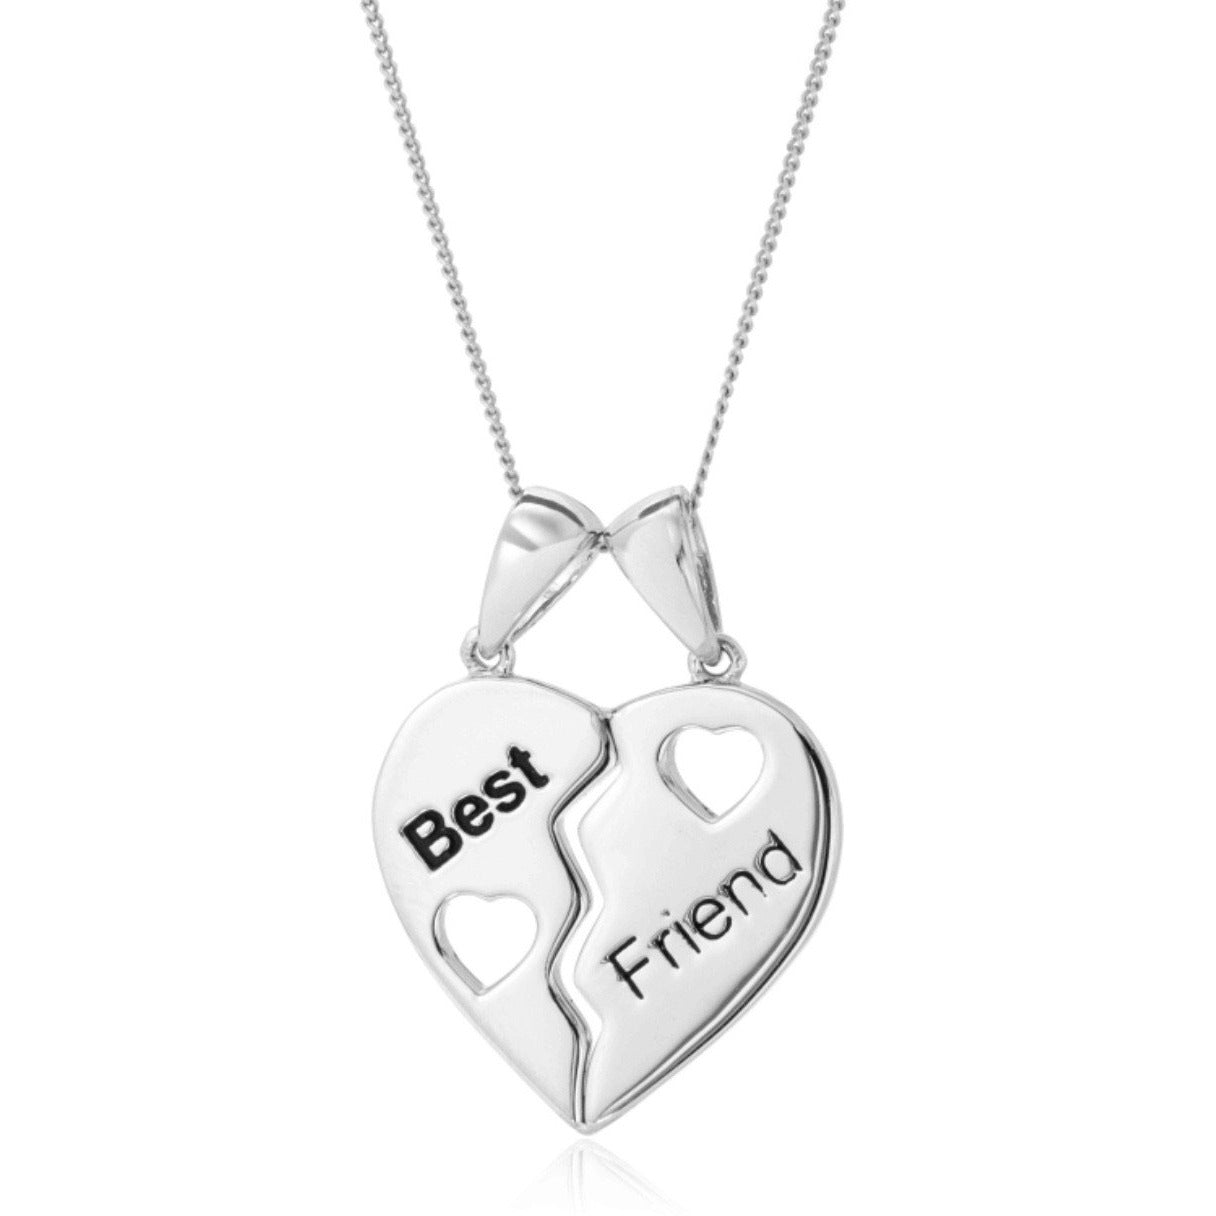 Best Friend 925 Sterling Silver Pendant with Sterling Silver Chain. - RubyJade